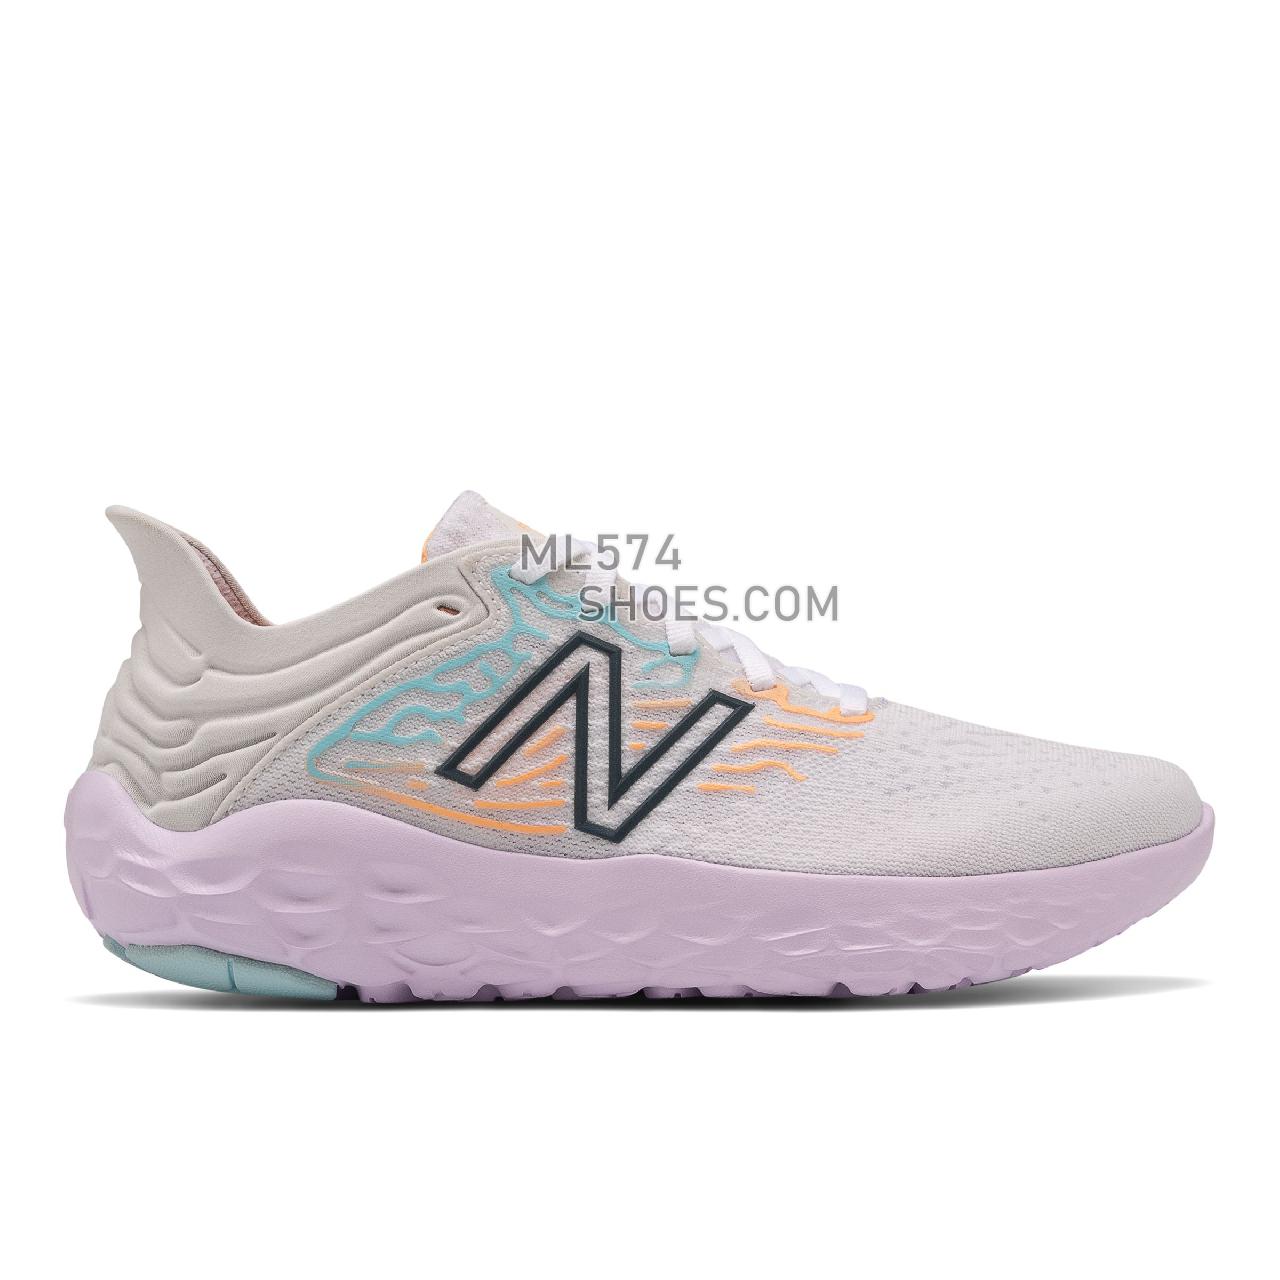 New Balance Fresh Foam Beacon v3 - Women's Neutral Running - White with Astral Glow - WBECNCW3